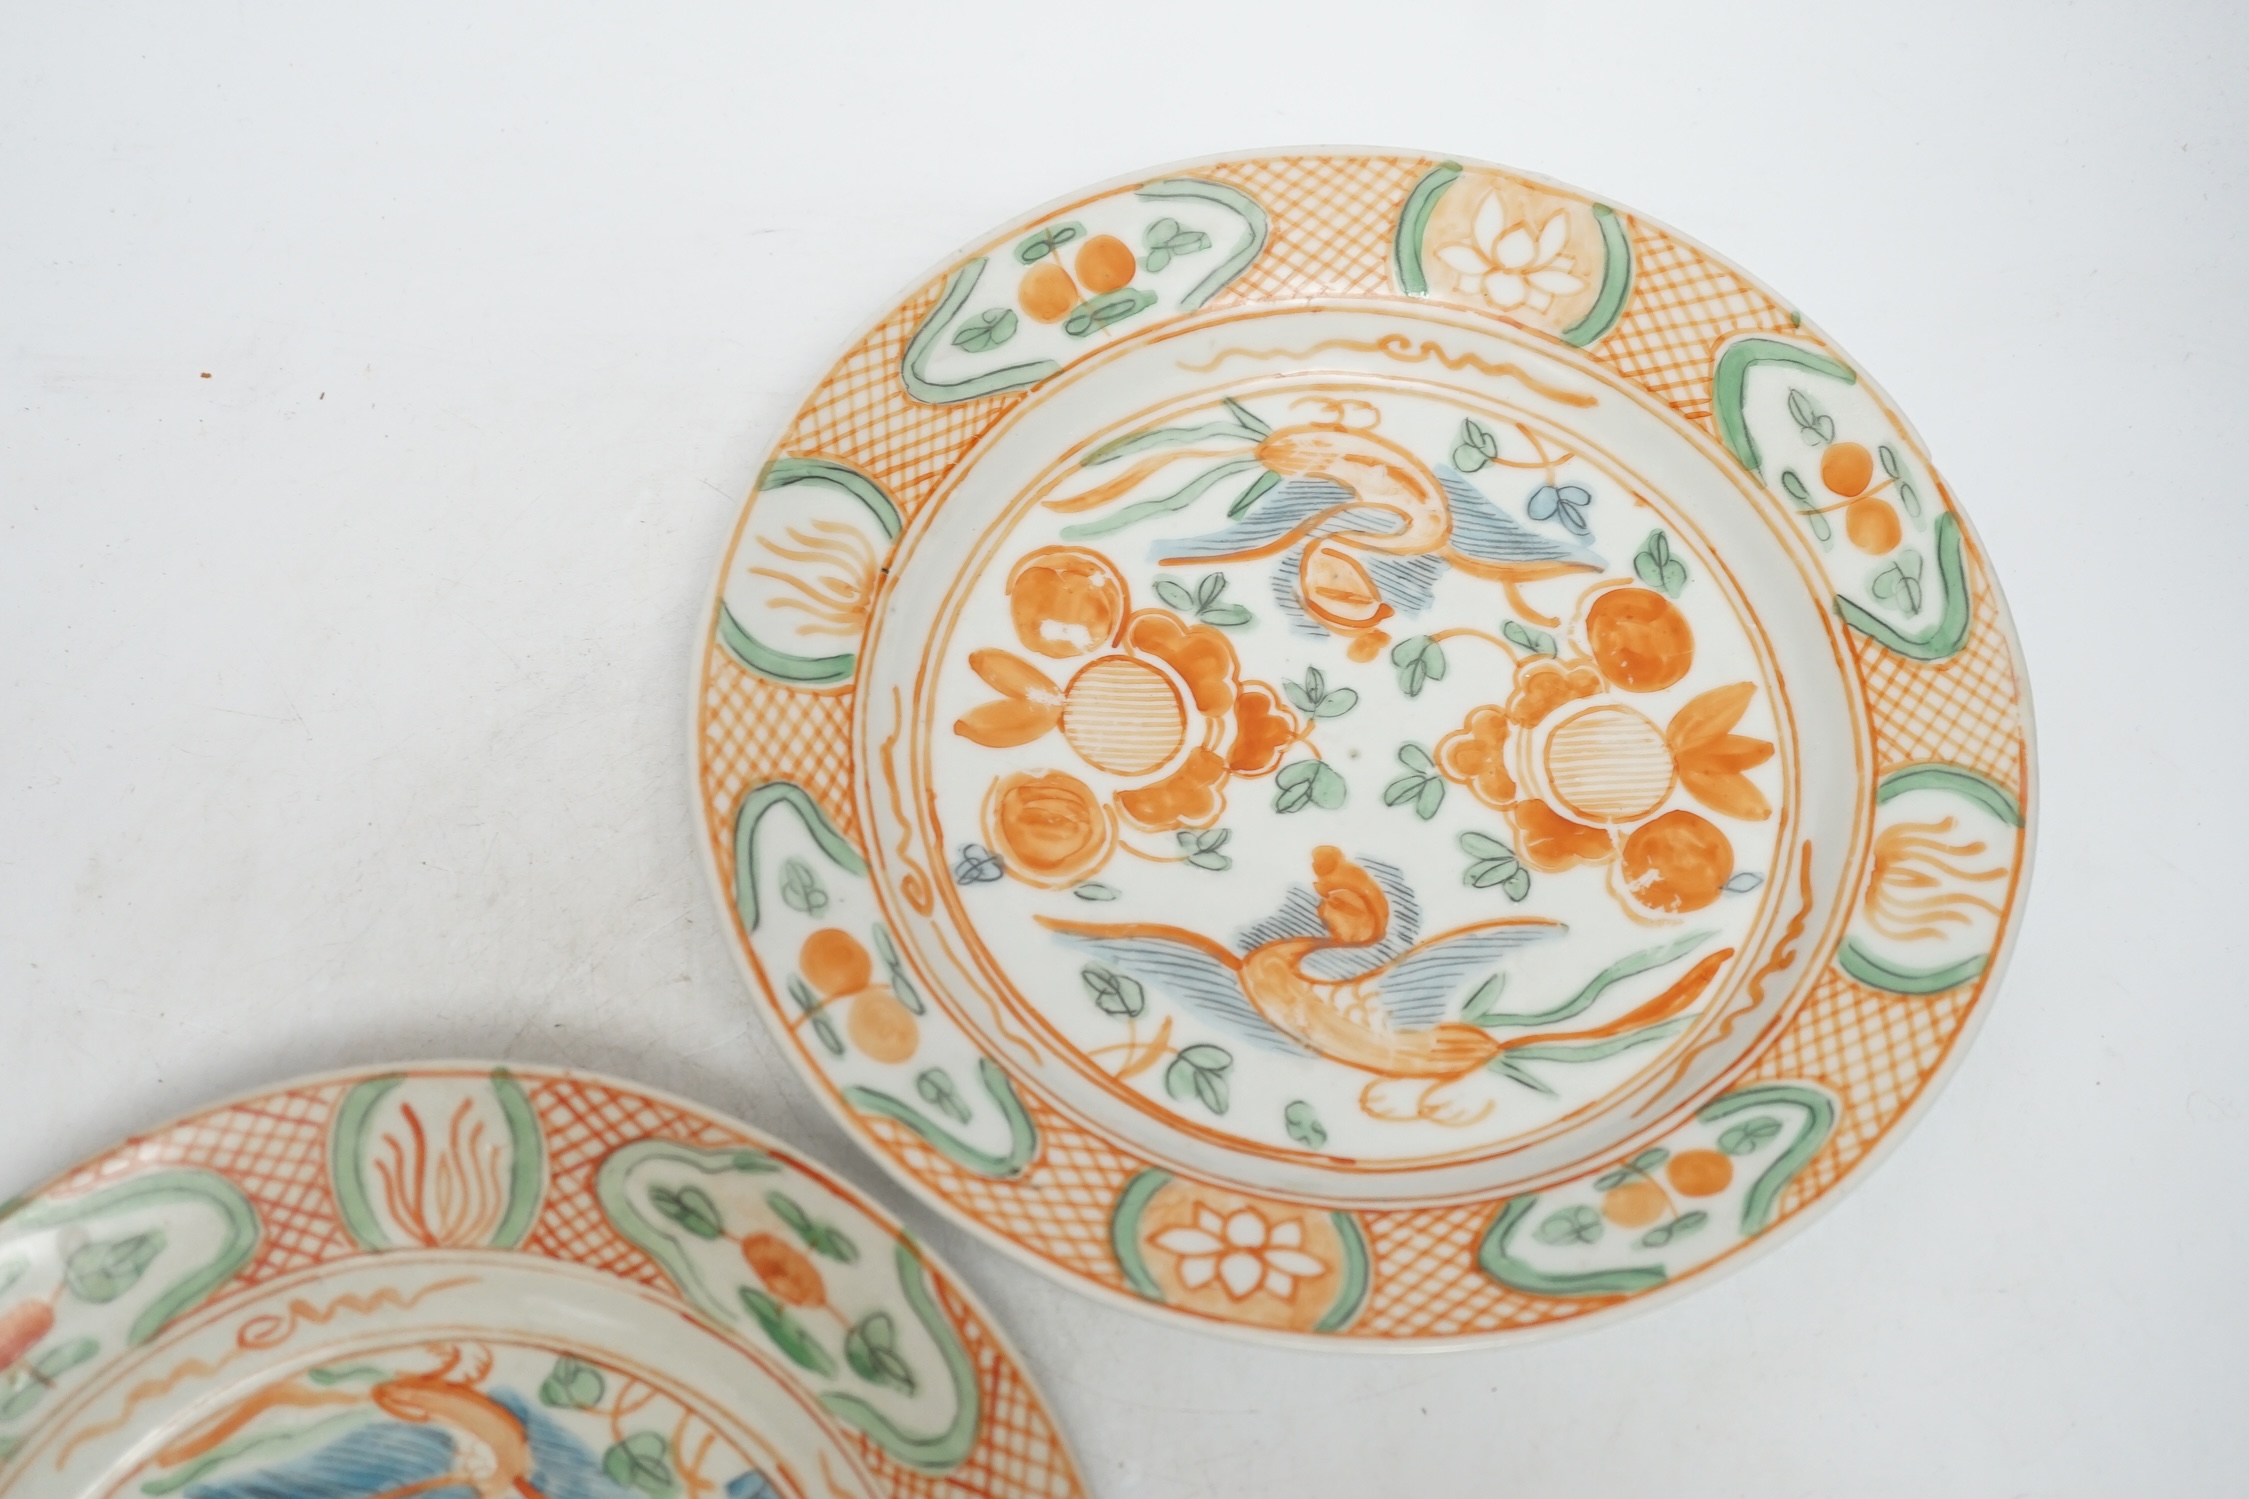 A pair of Chinese Swatow enamelled porcelain plates, late 16th century, 24cm - Image 3 of 4